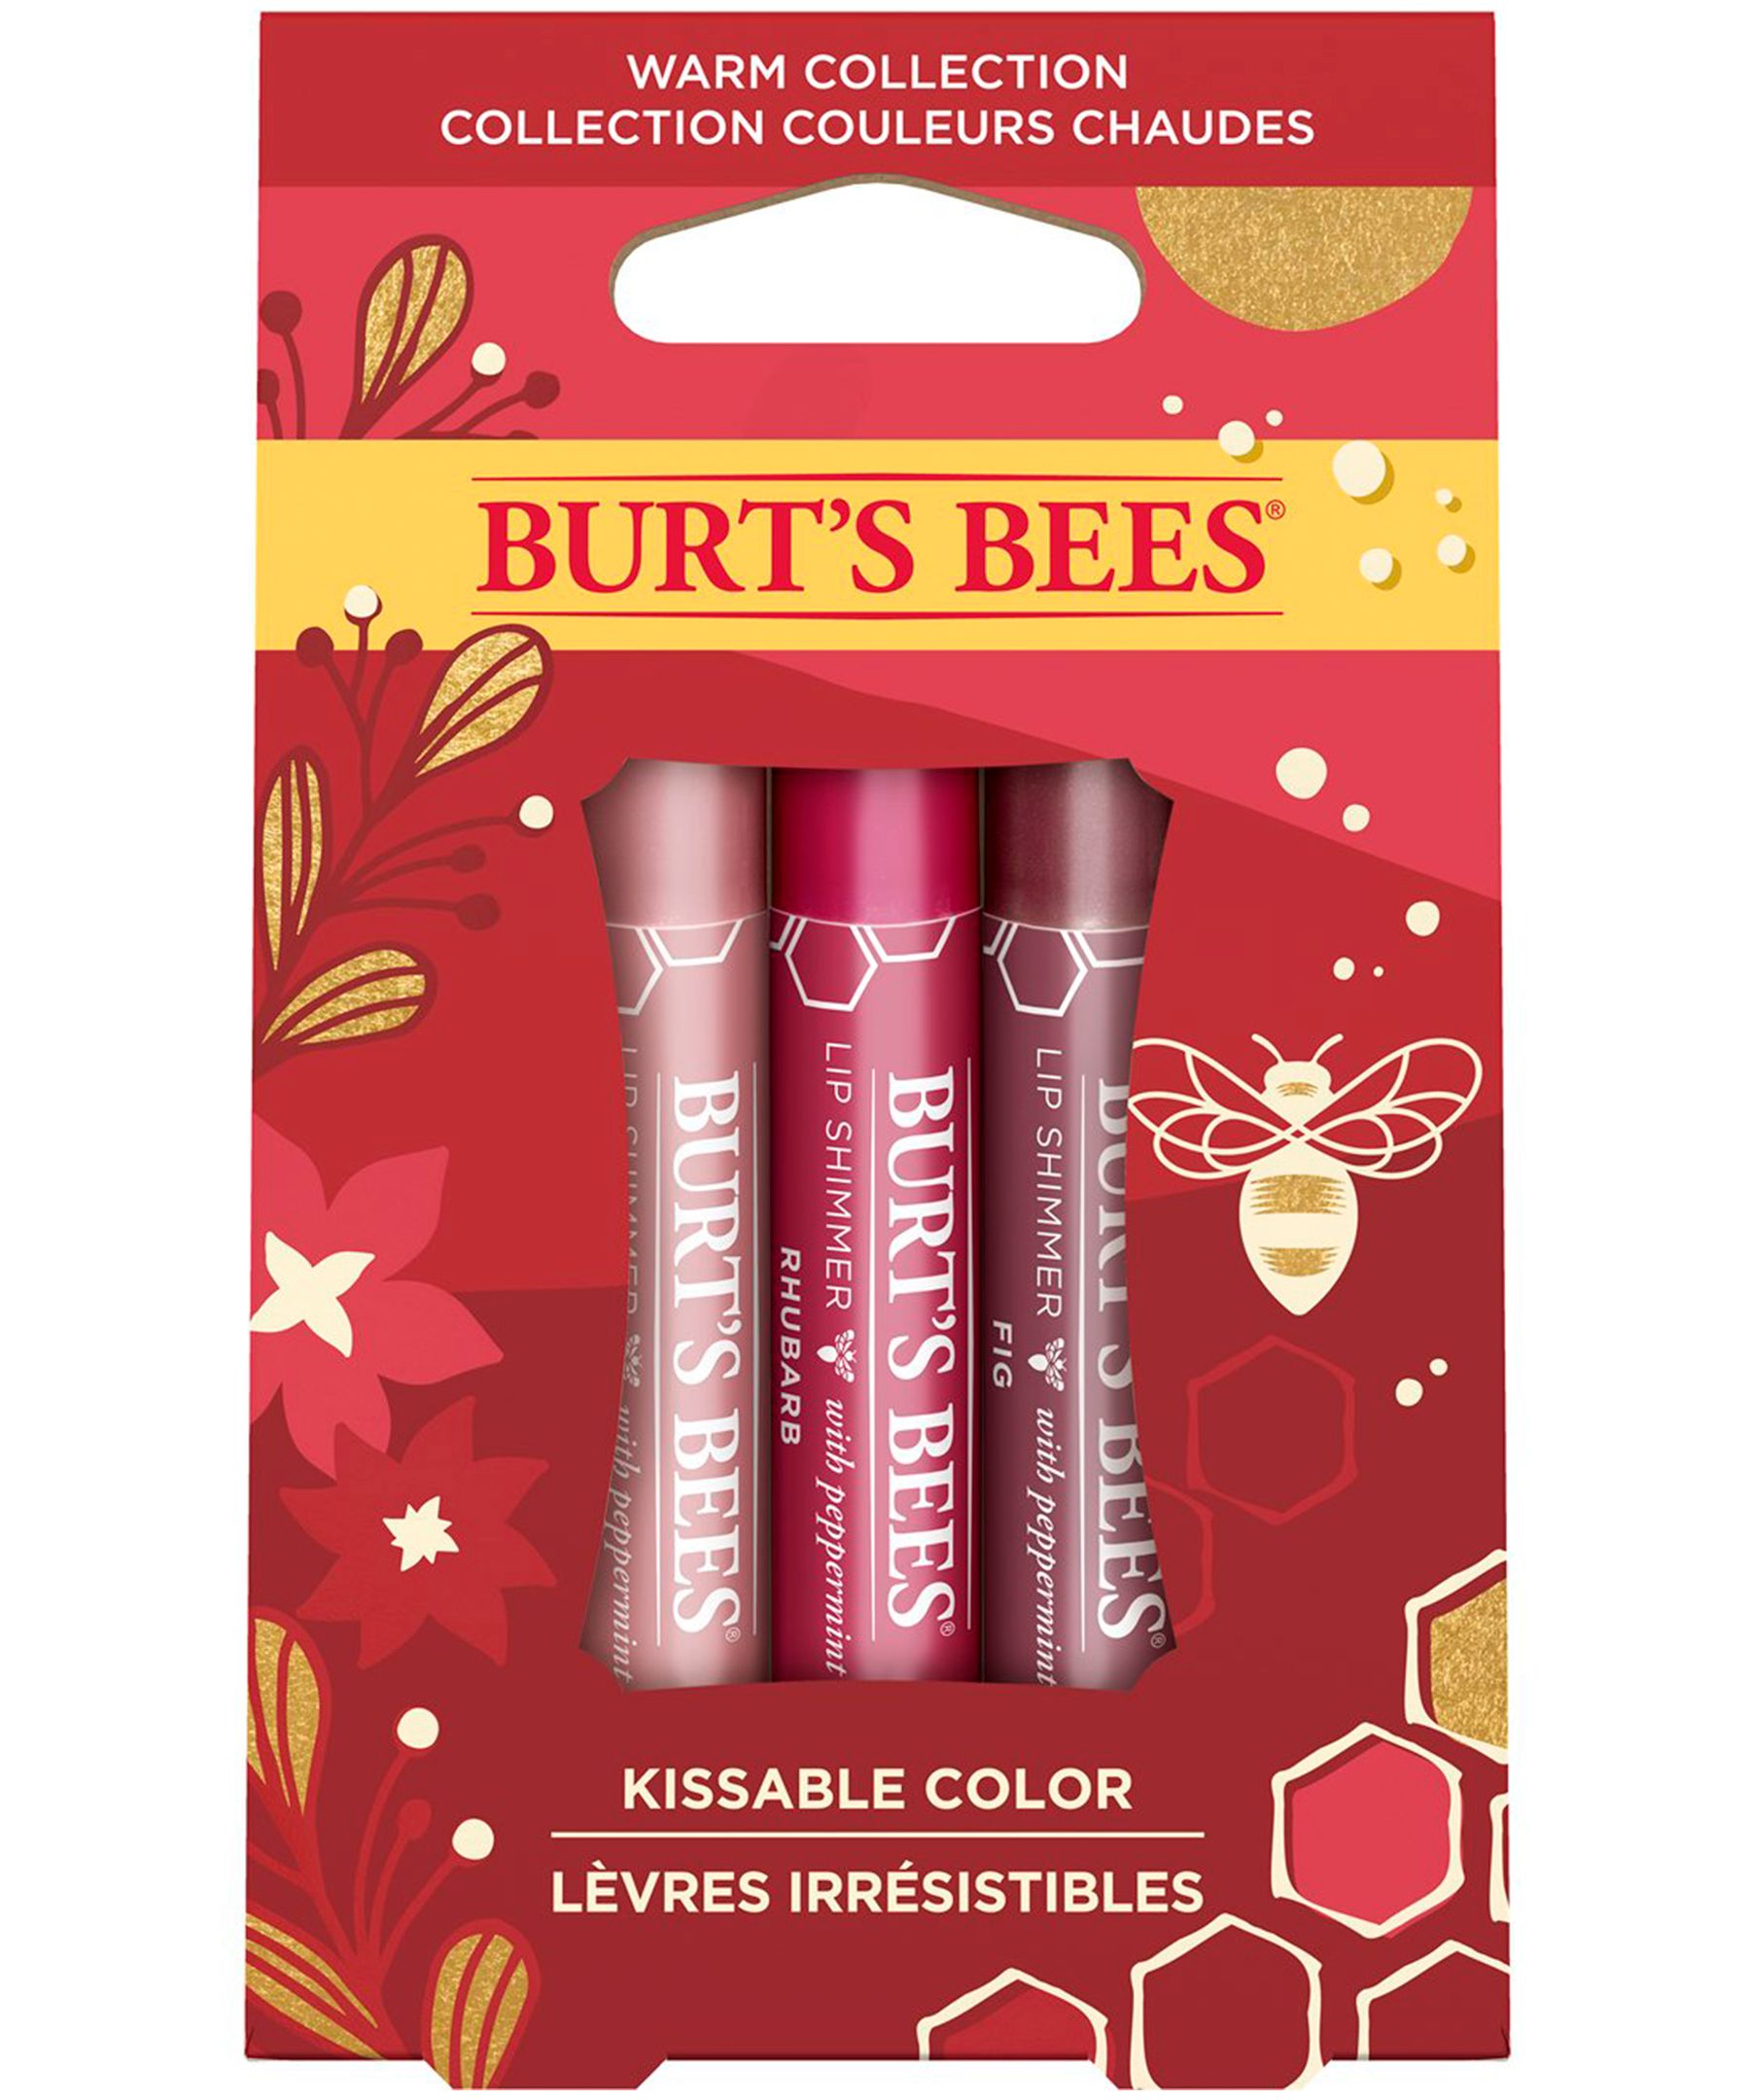 https://media-www.marks.com/product/marks-work-wearhouse/industrial-world/mens-accessories/410034714987/burts-bees-unisex-3-pack-holiday-kissable-lip-shimmer-33034c44-1968-4ba0-8e90-bae9669bf8d8-jpgrendition.jpg